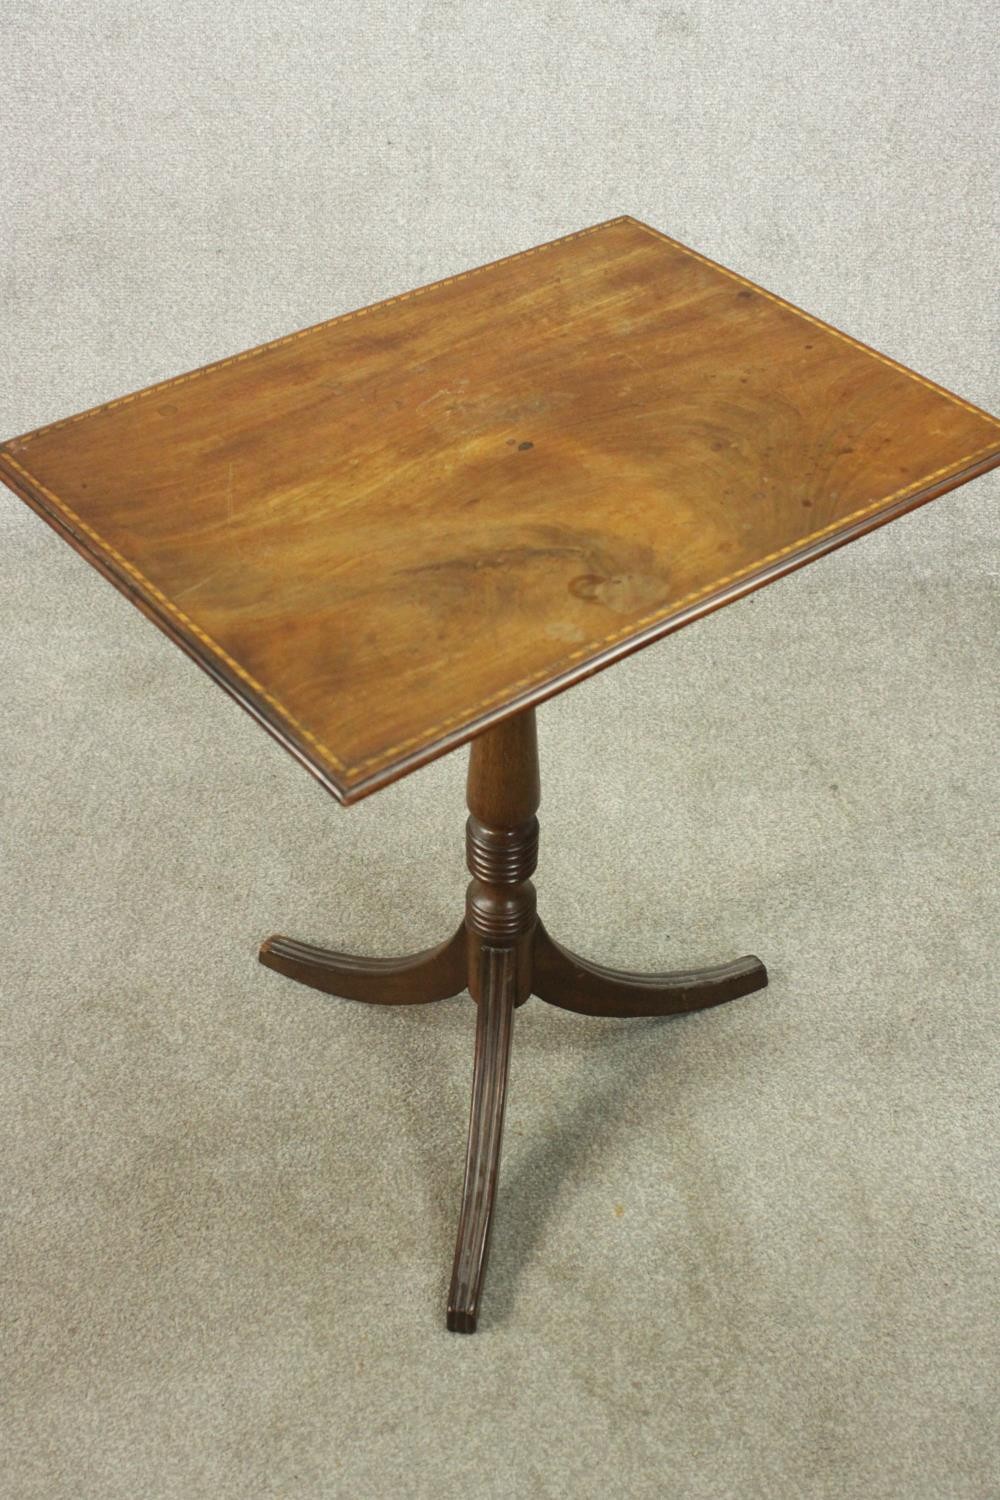 A 19th century walnut occasional table, the rectangular top with inlaid border, on a turned stem - Image 4 of 5